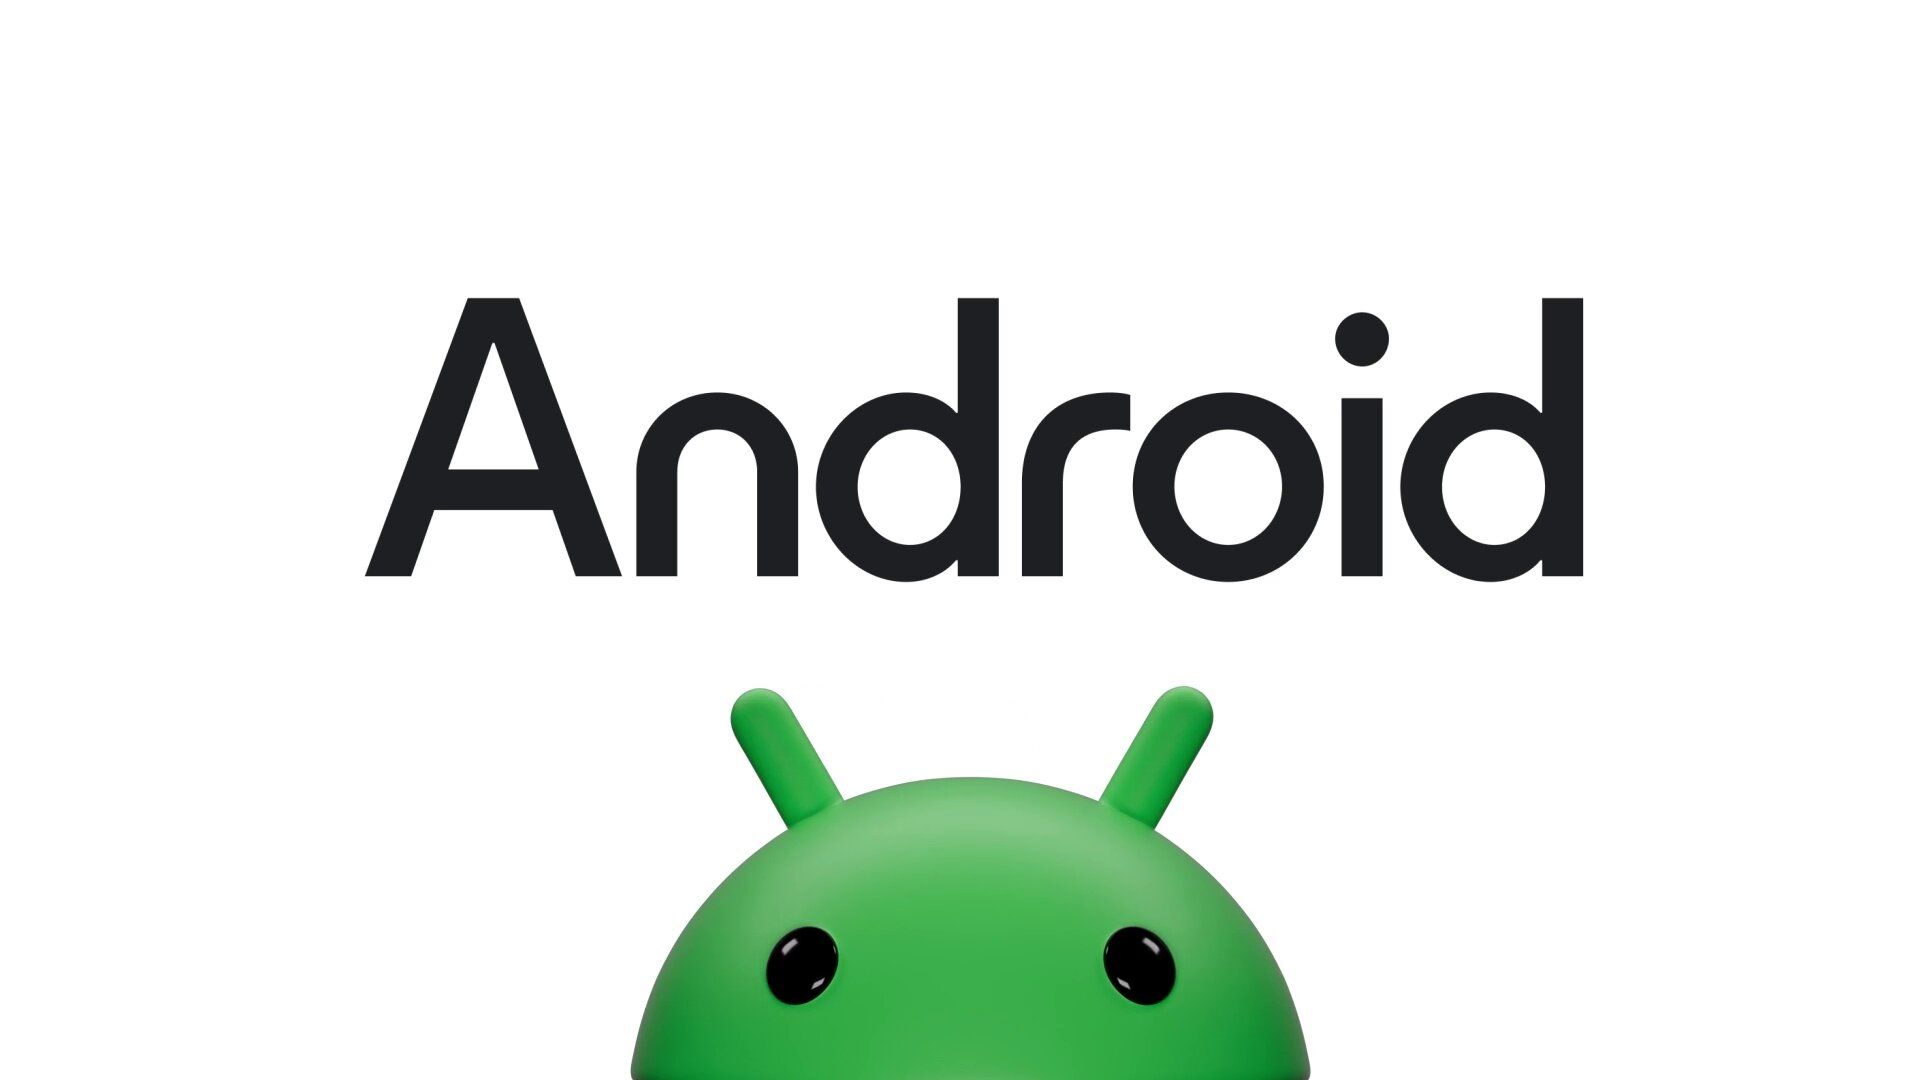 Android is getting its first brand makeover in over four years